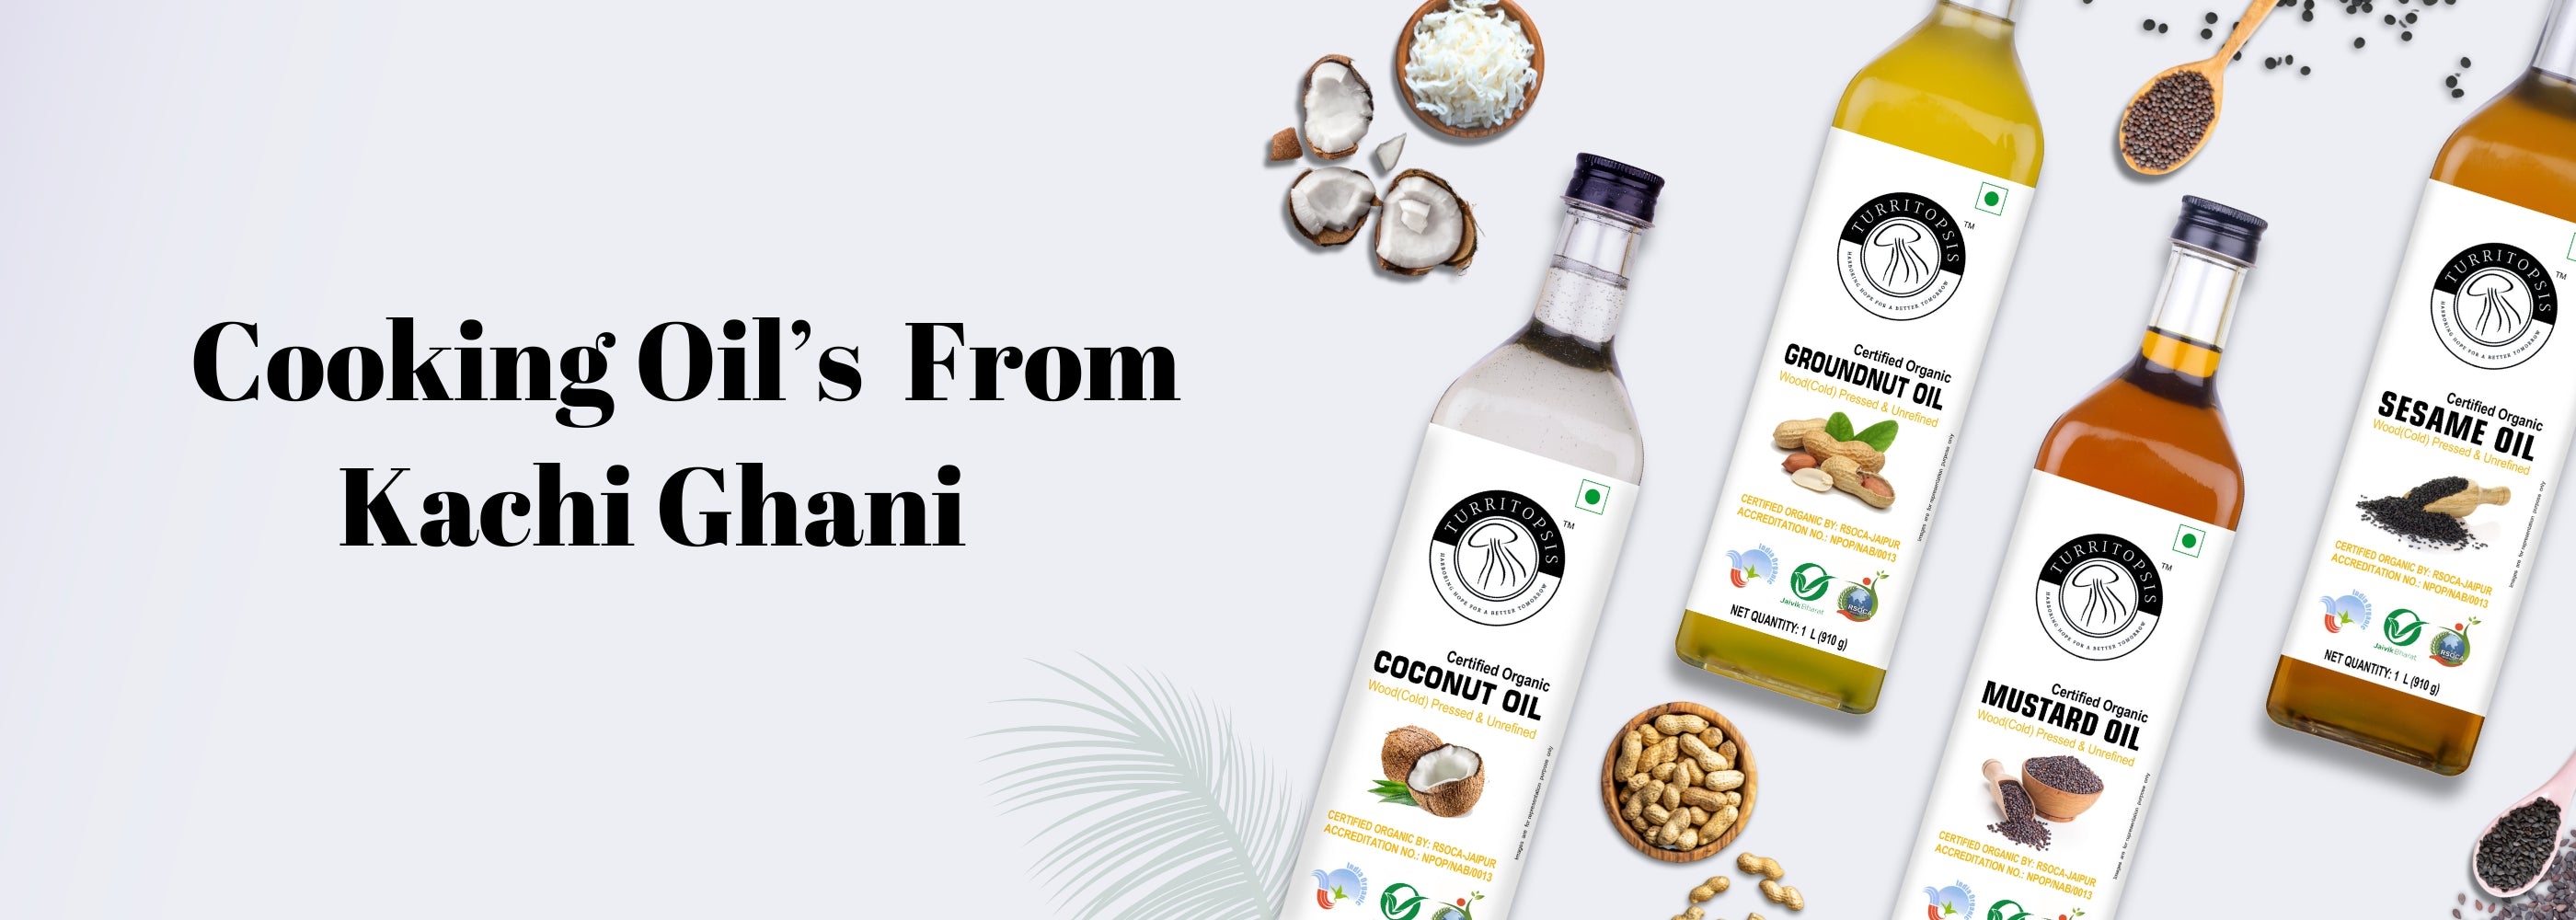 organic cooking oils from kachi ghani